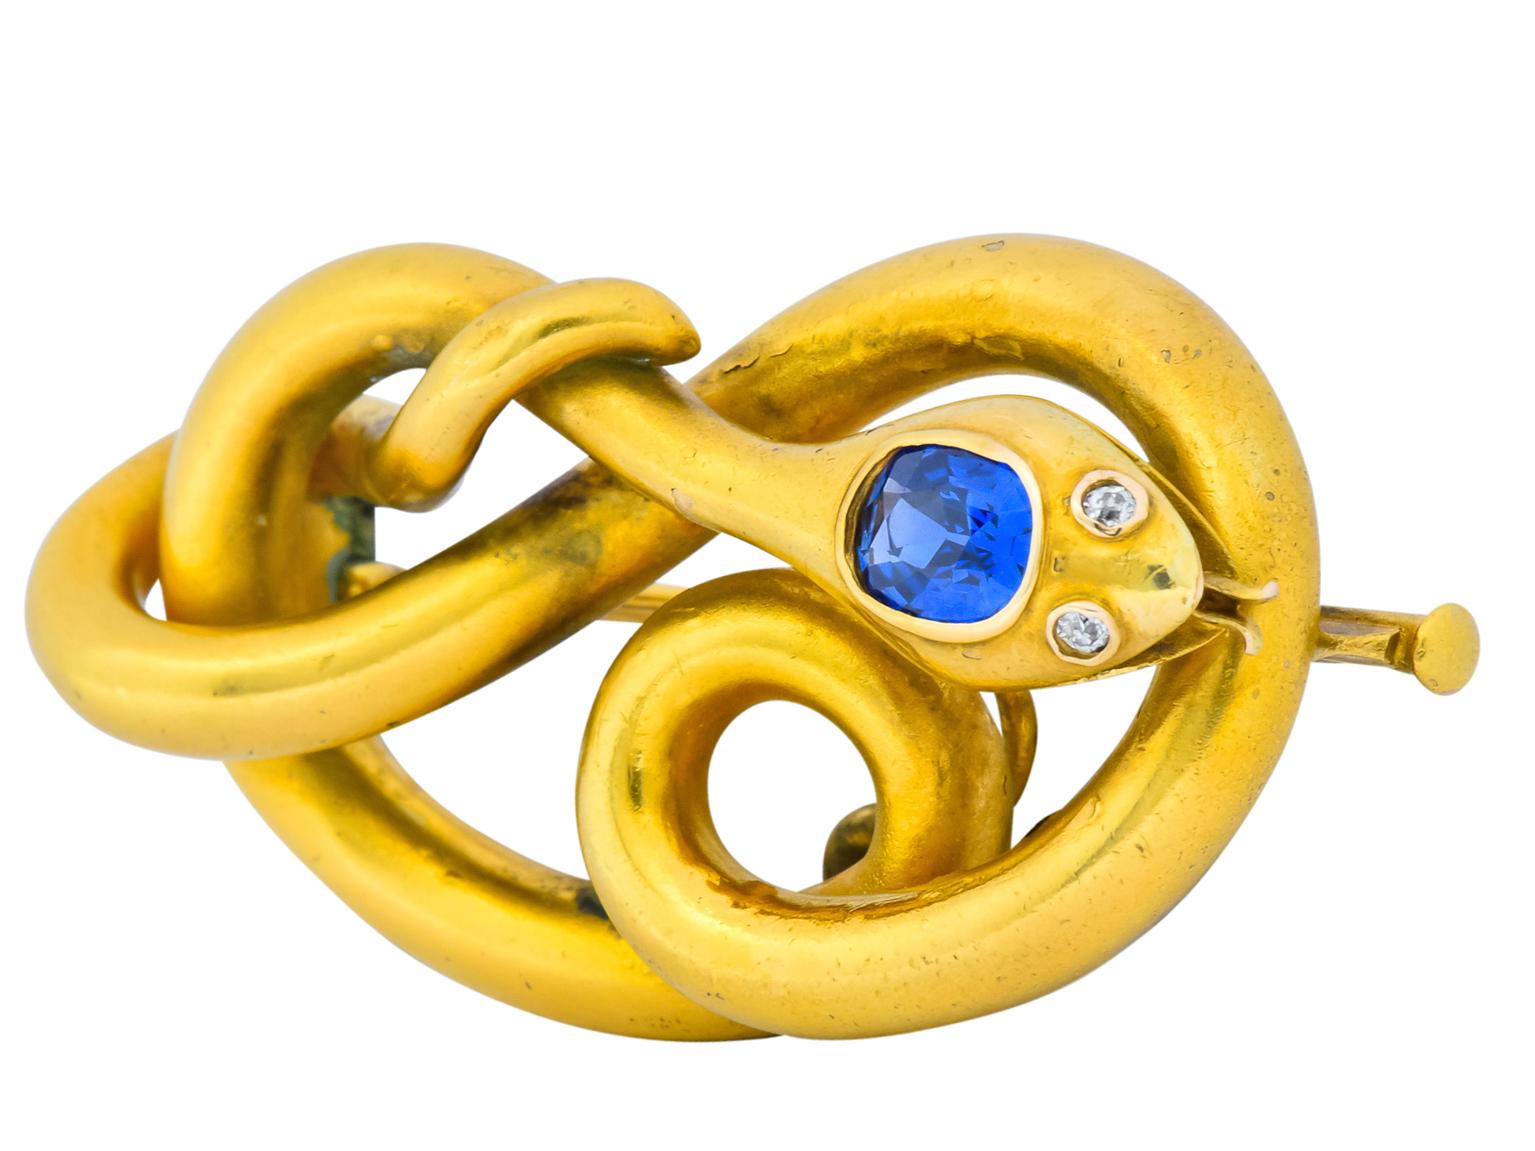 Brooch designed as matte gold snake intertwined upon itself

With a bezel set cushion brilliant cut Kashmir sapphire weighing 0.80 carat, transparent and vibrant blue in color with no indications of heating

Accented by two old European cut eyes